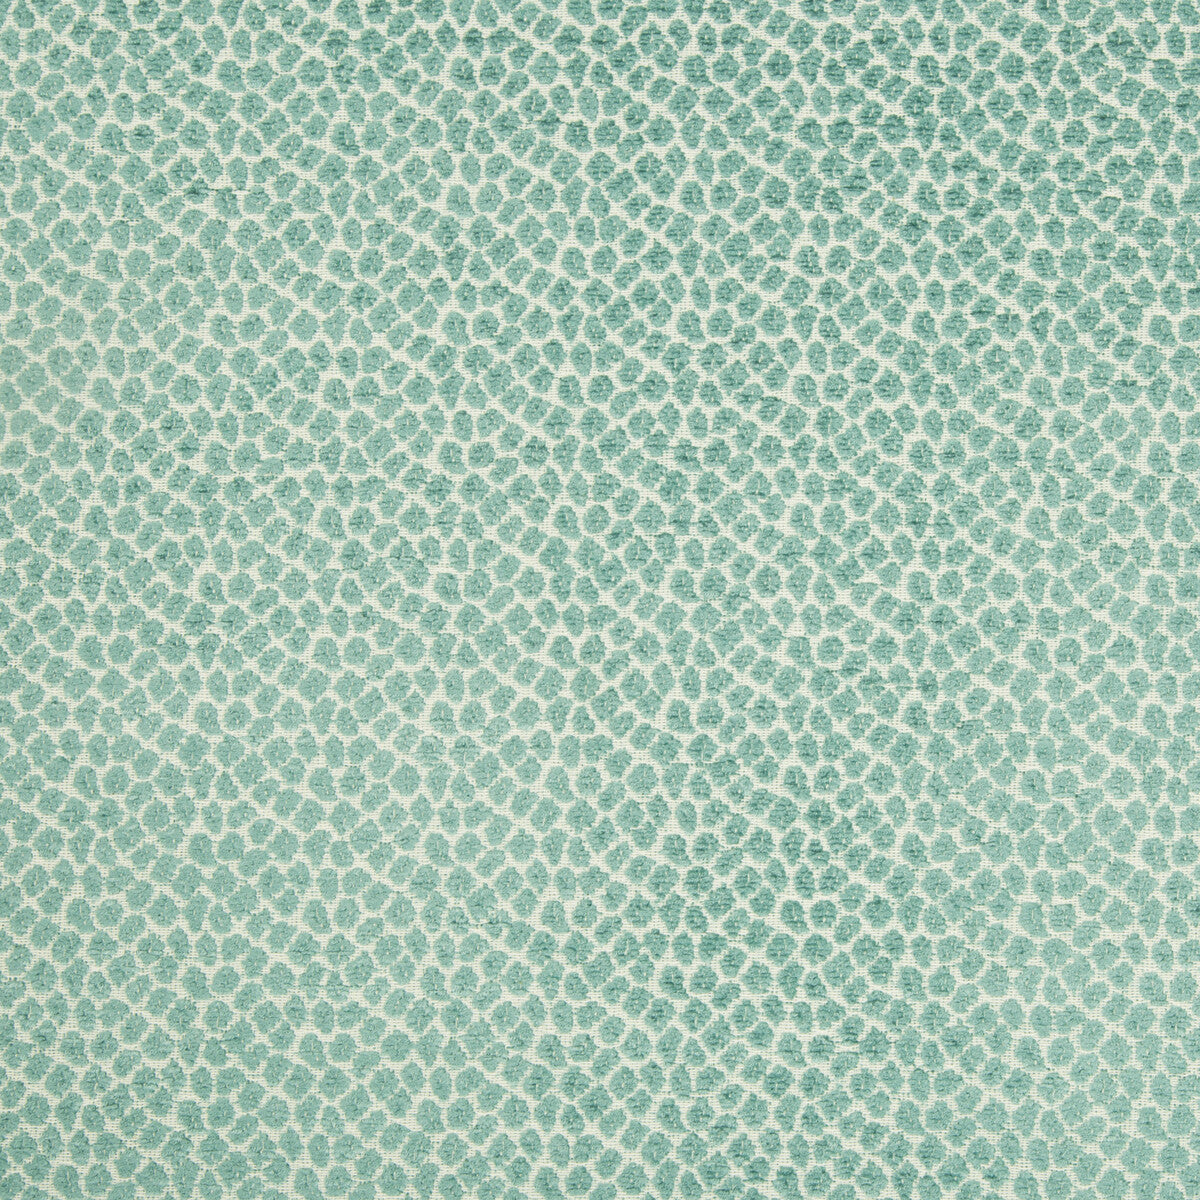 Kravet Contract fabric in 34745-135 color - pattern 34745.135.0 - by Kravet Contract in the Crypton Incase collection